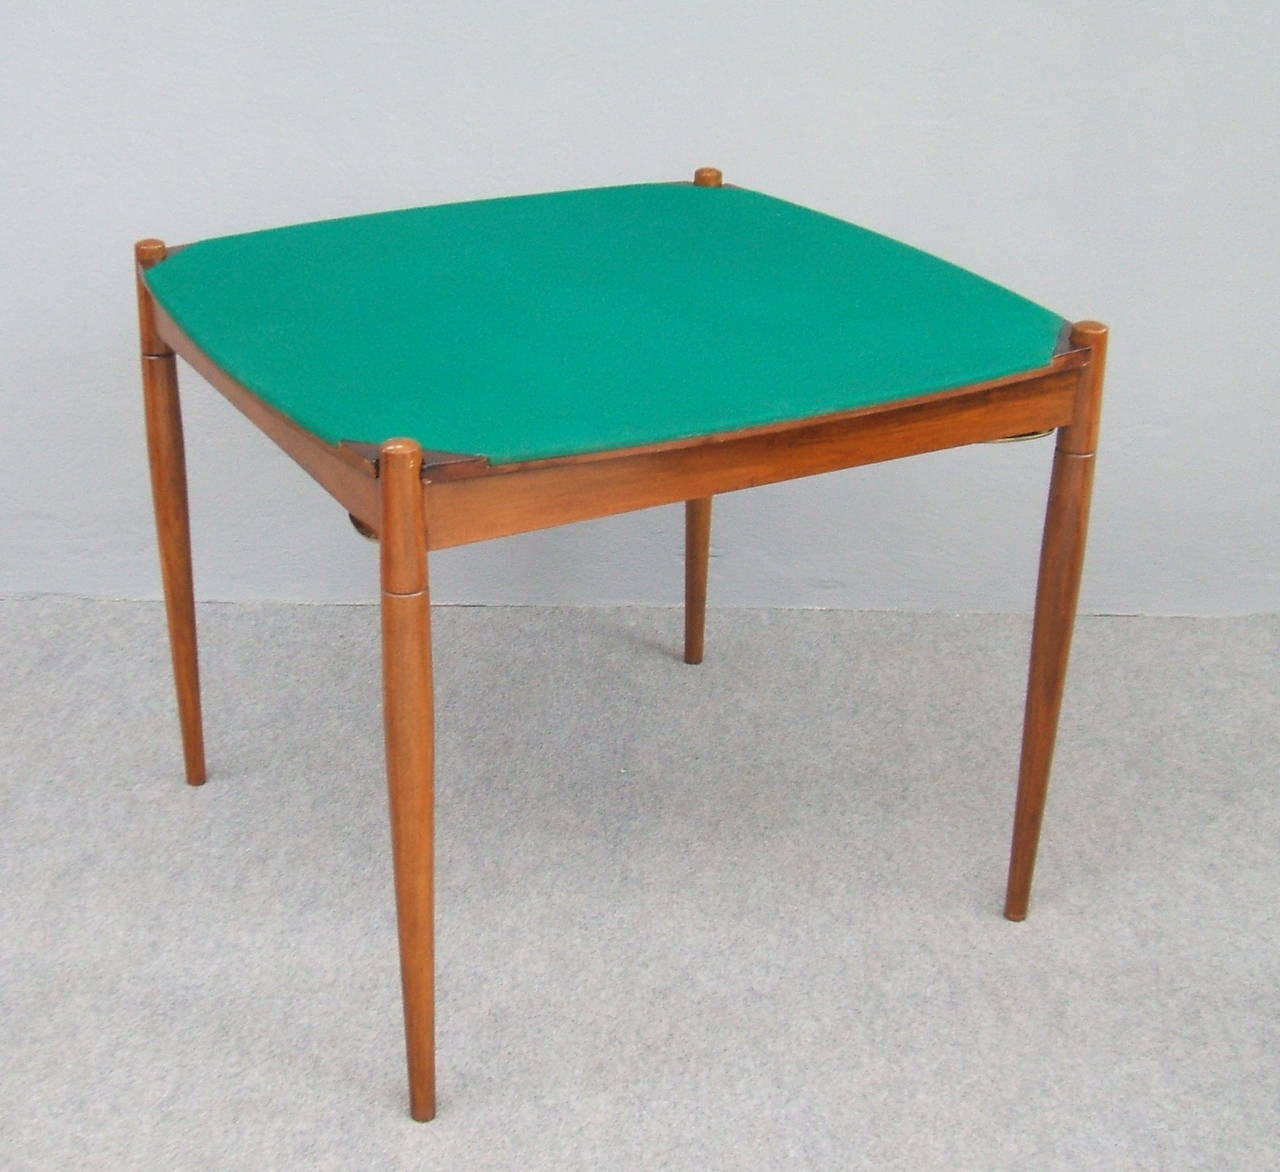 Famous game table designed by Gio Ponti for Reguitti as marked on the back.
Reversible top, green velvet or wood( palisander).. Brass sides in the corners.